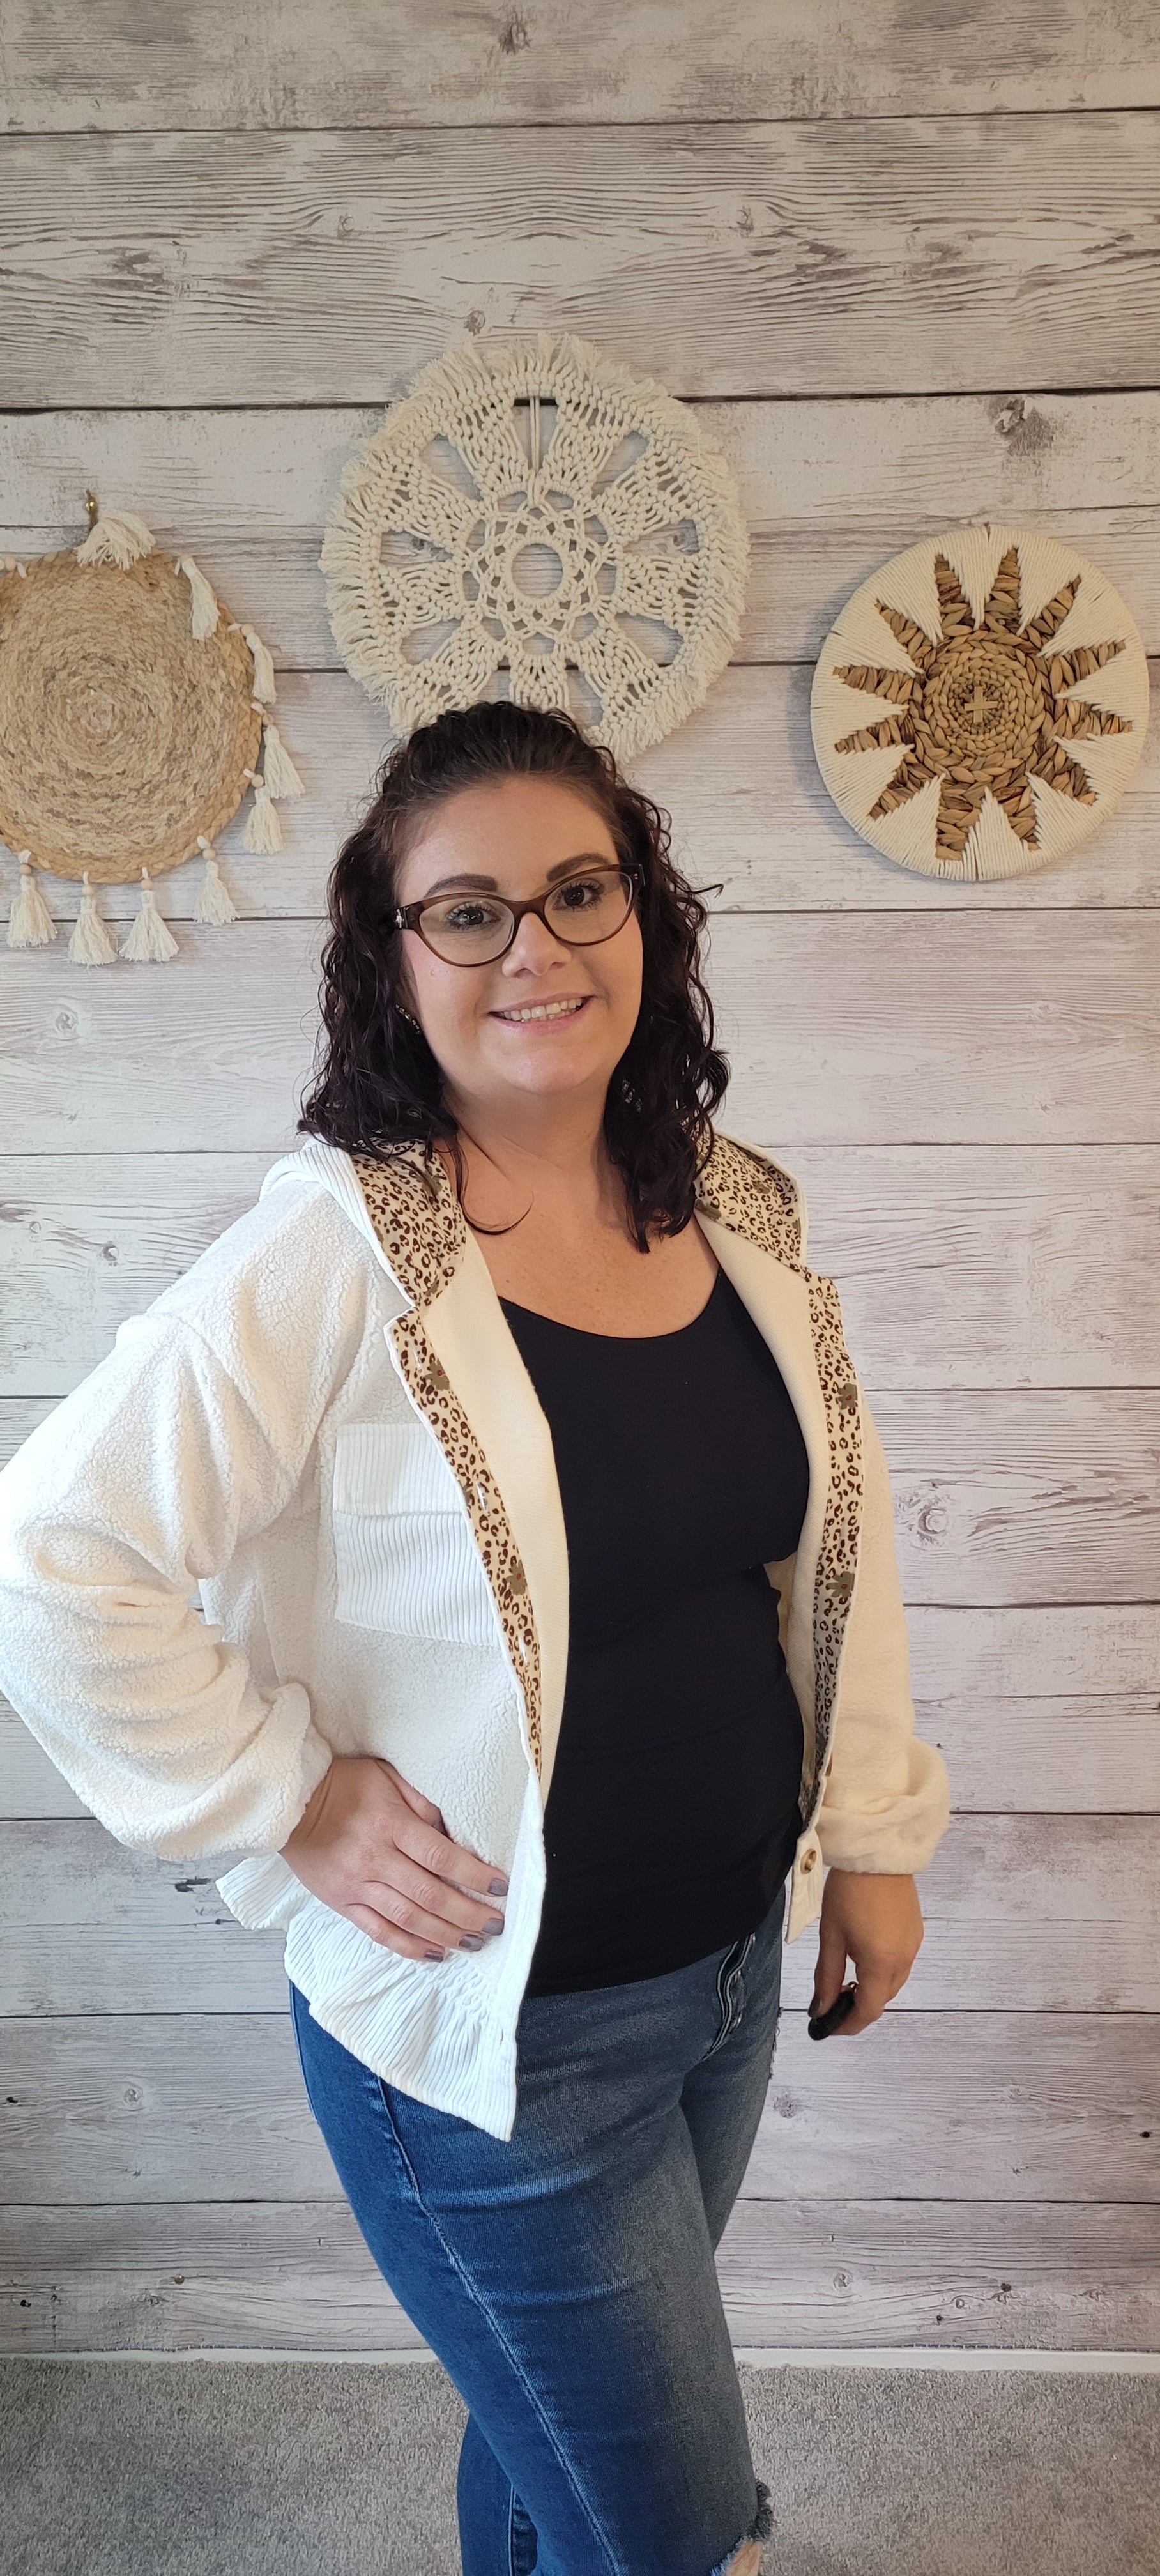 Stay cozy and stylish in the Margo Ivory Sherpa Hoodie Jacket! Crafted with practical details like a button-down front and functional hood, this peplum-style jacket will become your favorite go-to for cool days. The ivory fabric is lined with a bold leopard and floral print, adding a fun, fashionable twist. Get ready to cuddle up! Sizes small through large.